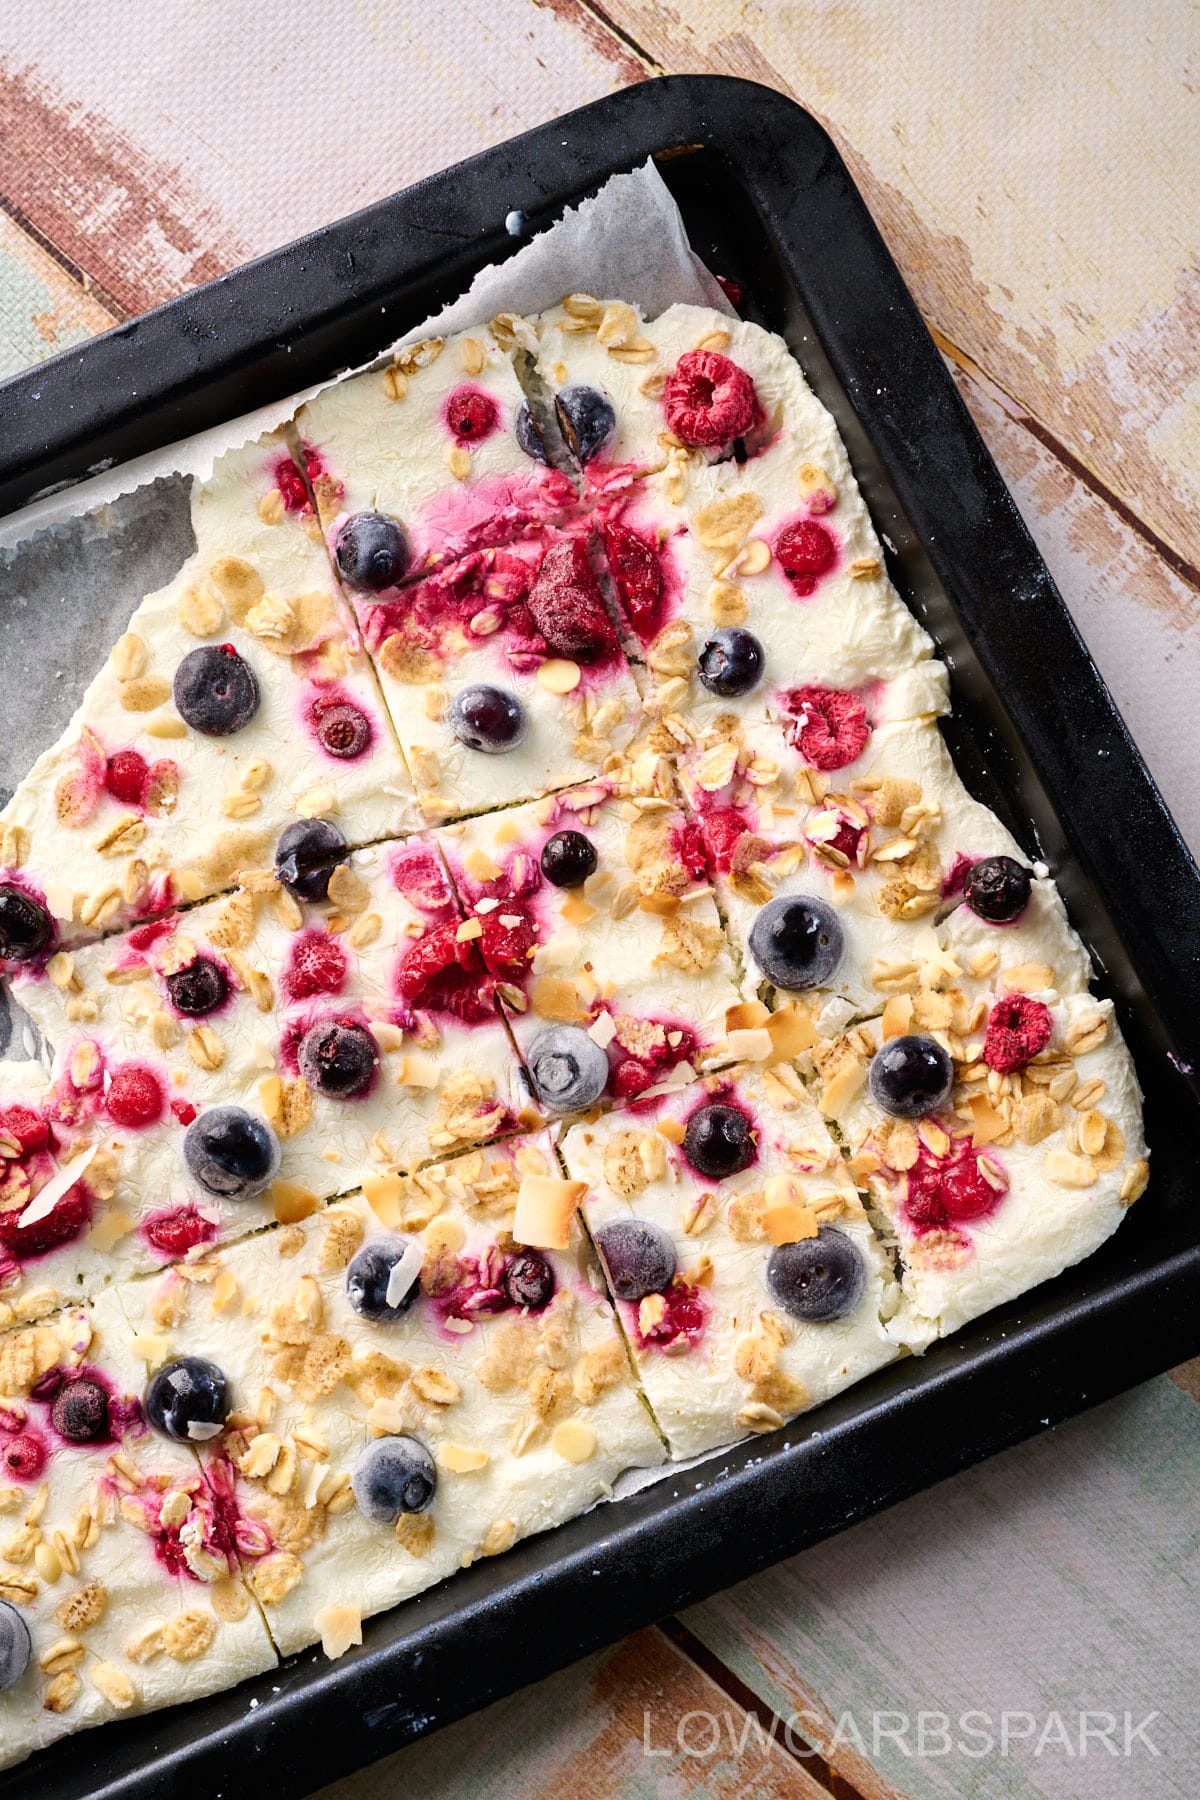 Baking sheet filled with Greek yogurt topped with blueberries, raspberries, and granola, ready for freezing.